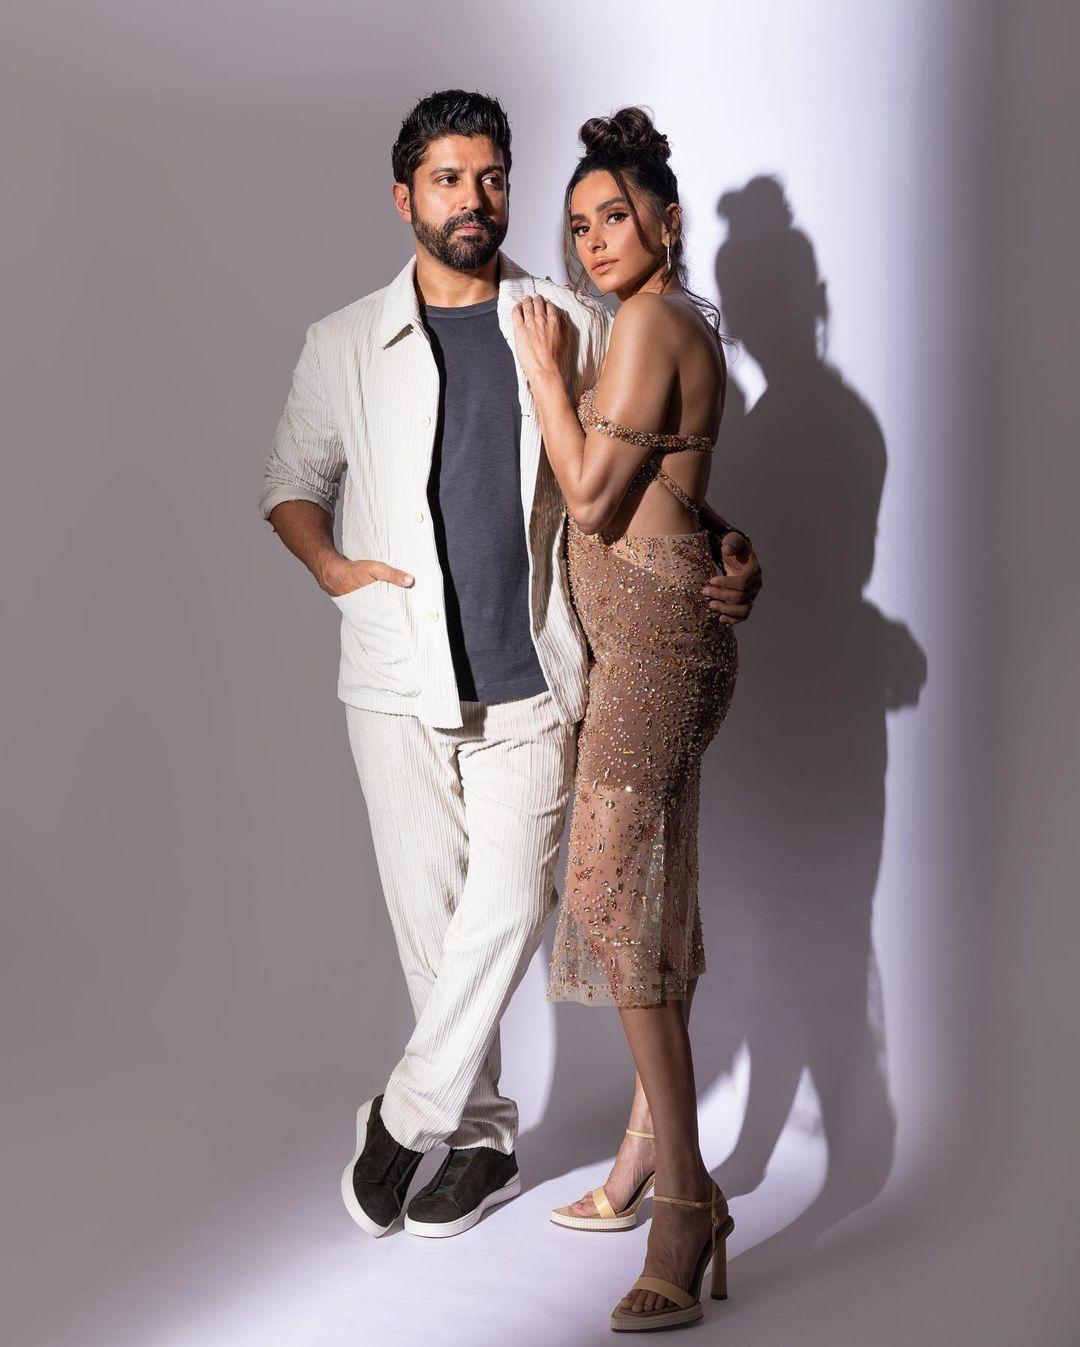 In this look, Shibani wore a glittery off-shoulder dress and put a chic bun with nude makeup, while Farhan complemented her with a grey T-shirt paired with white pants and a matching shirt